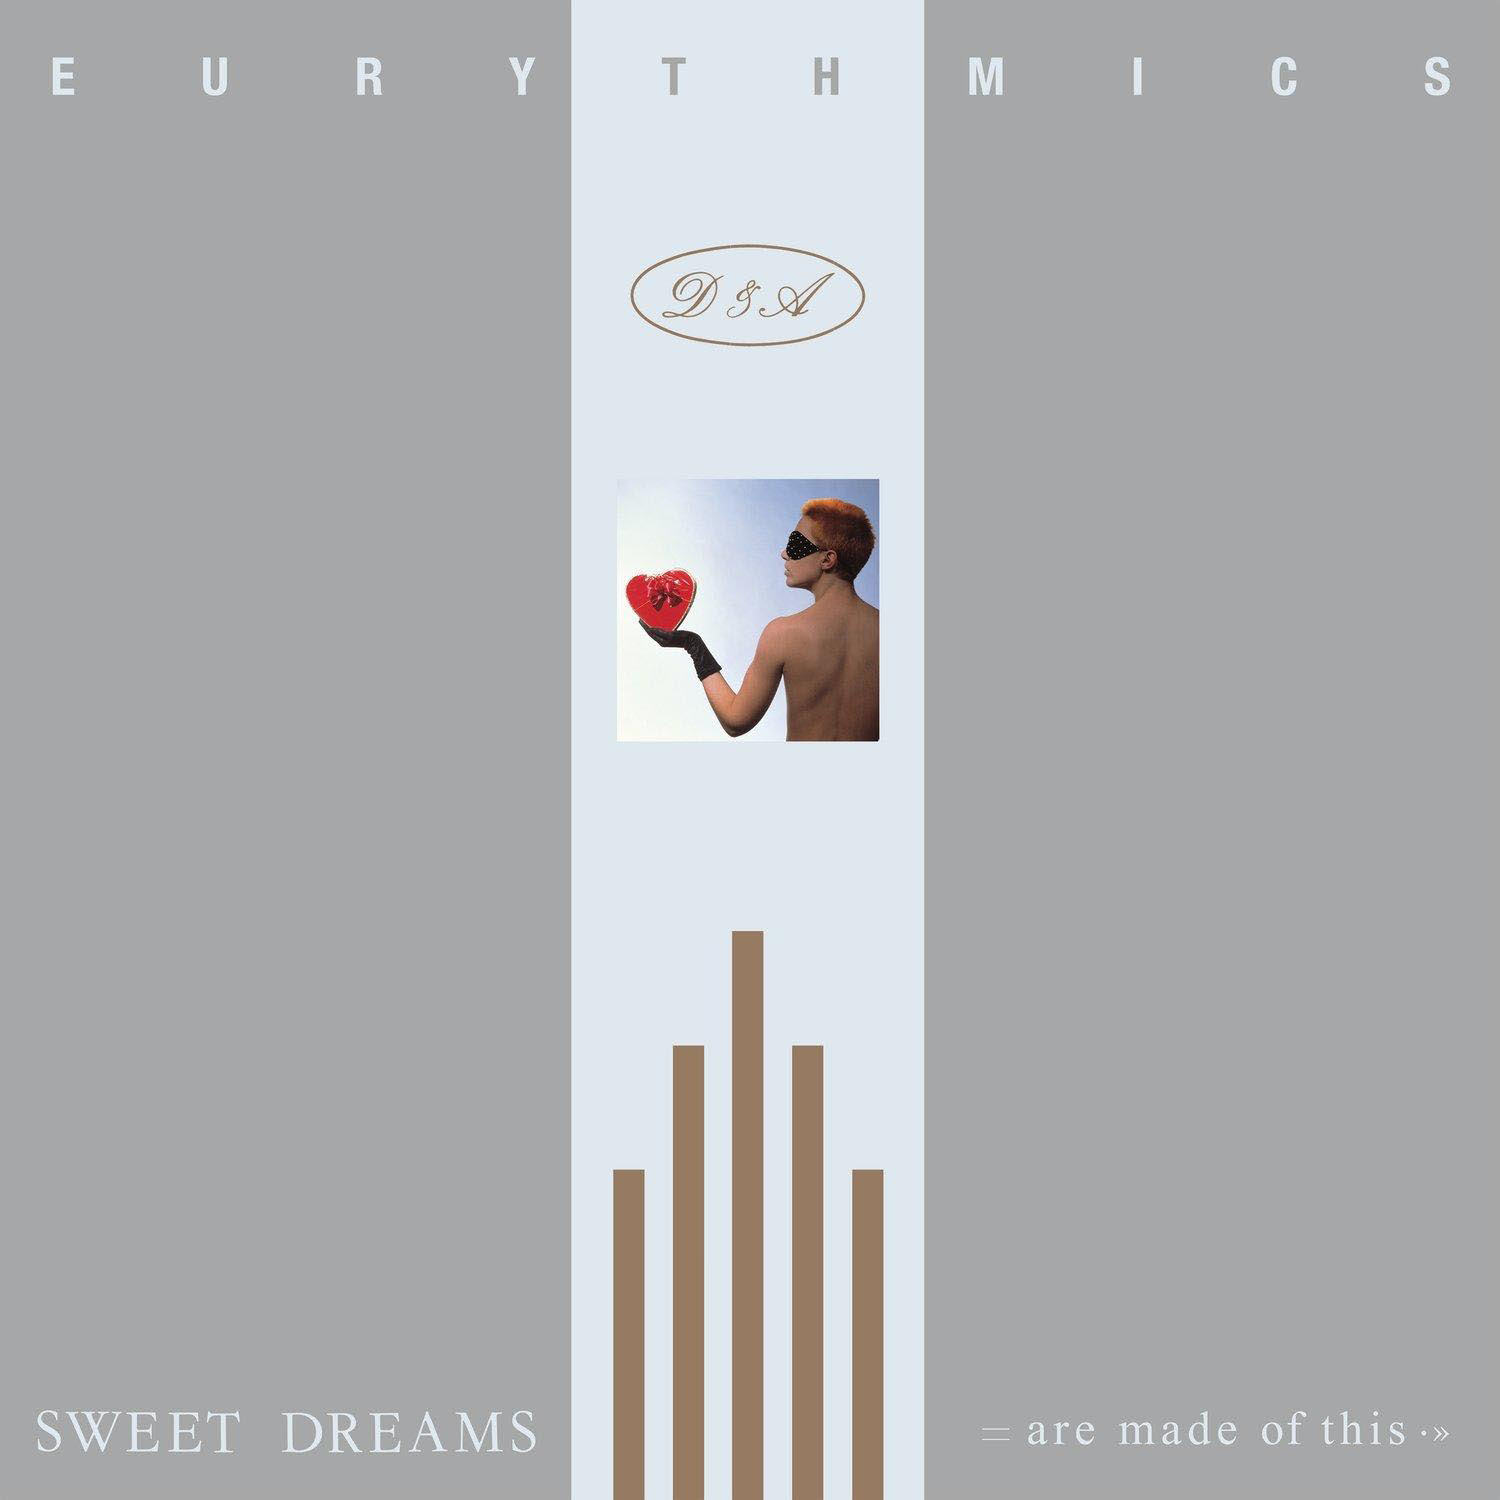 Eurythmics of (Vinyl) Dreams Sweet Made (Are This) - -